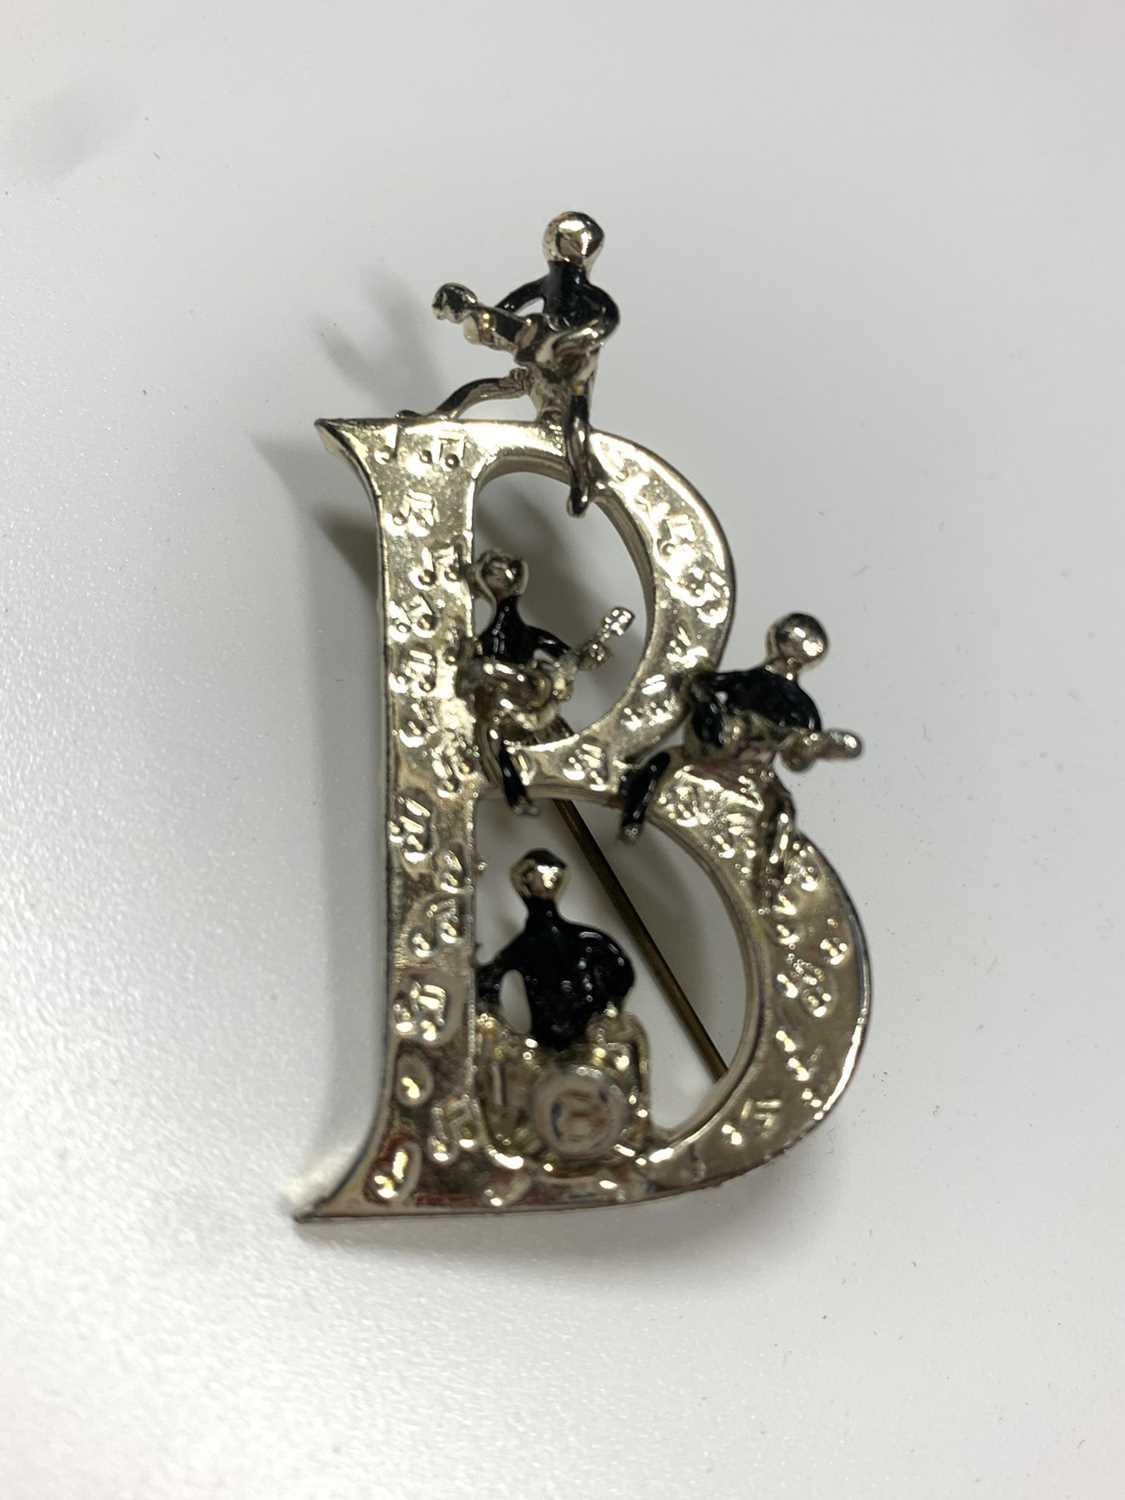 1960s Beatles brooch by Exquisite, the larger capital B decorated with musical notes